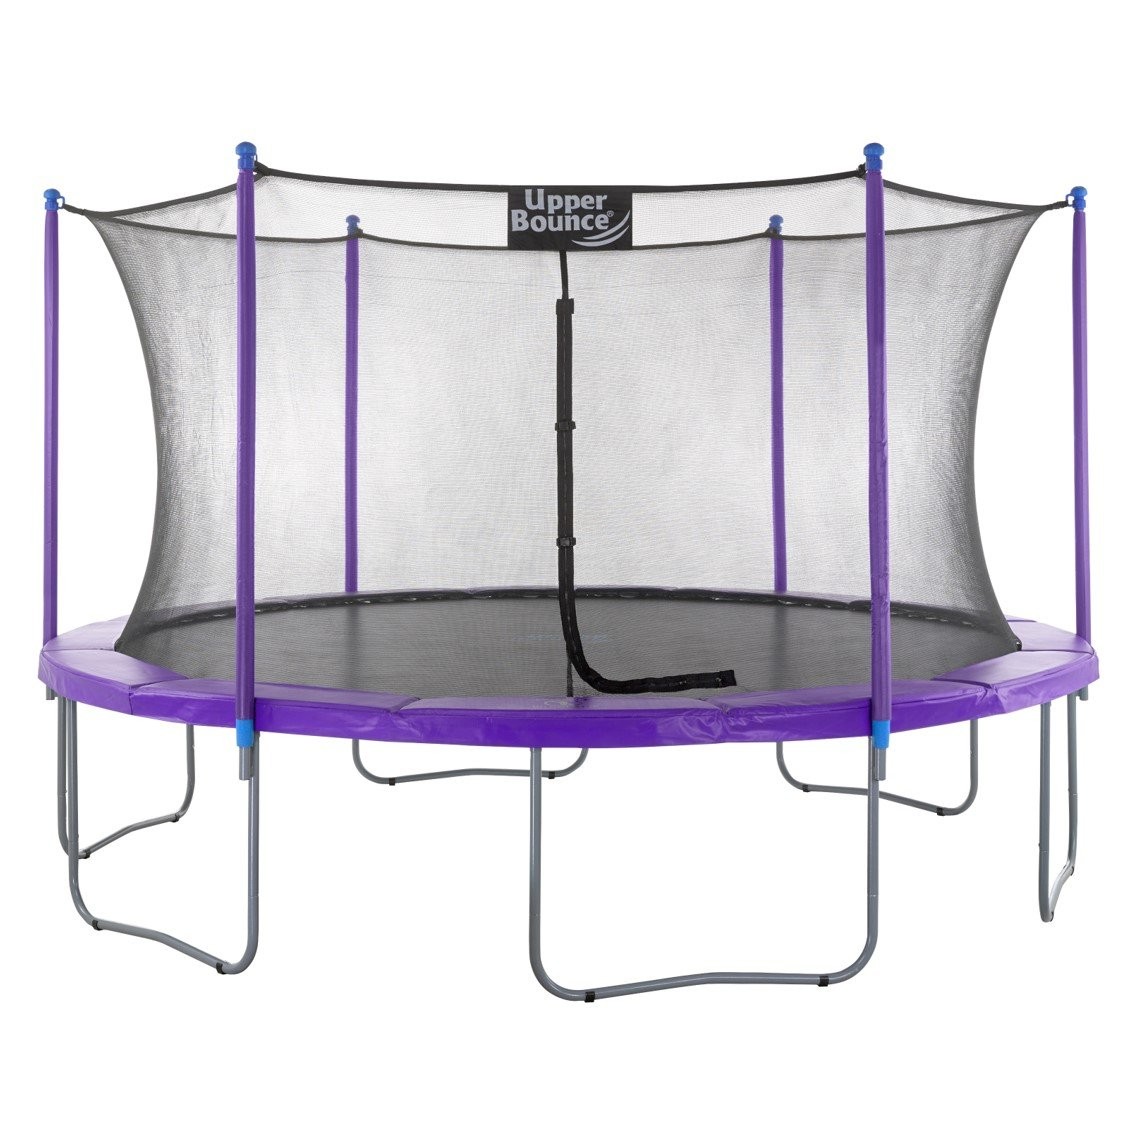 14Ft Large Trampoline and Enclosure Set | Garden & Outdoor Trampoline with Safety Net, Mat, Pad | Purple